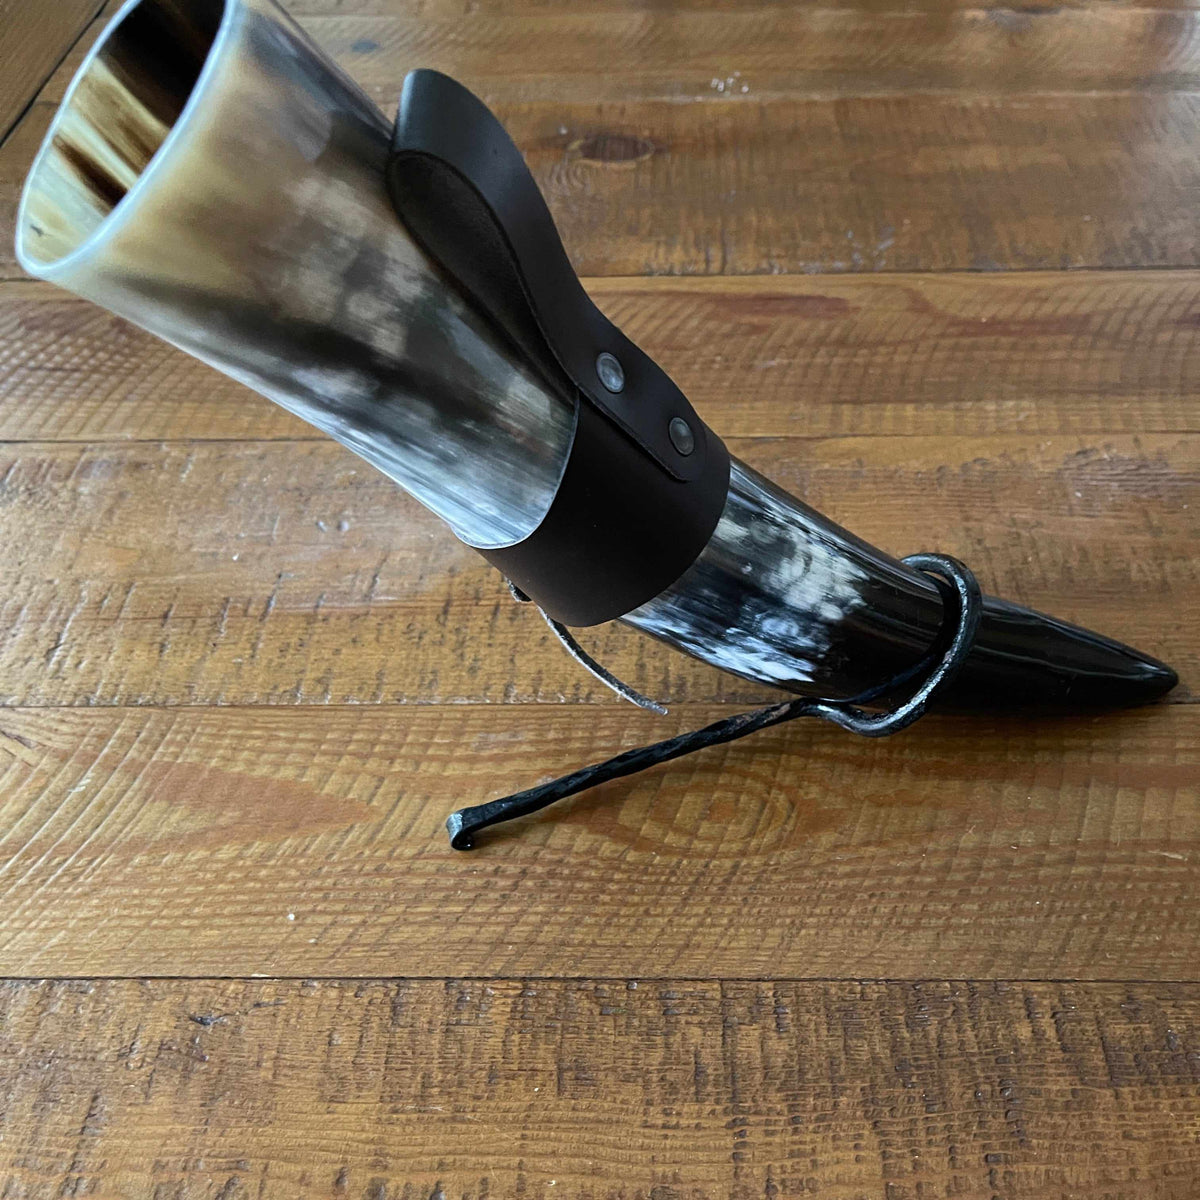 Viking Drinking Horn with Belt Loop and Iron Stand - Odin&#39;s Ravens Design